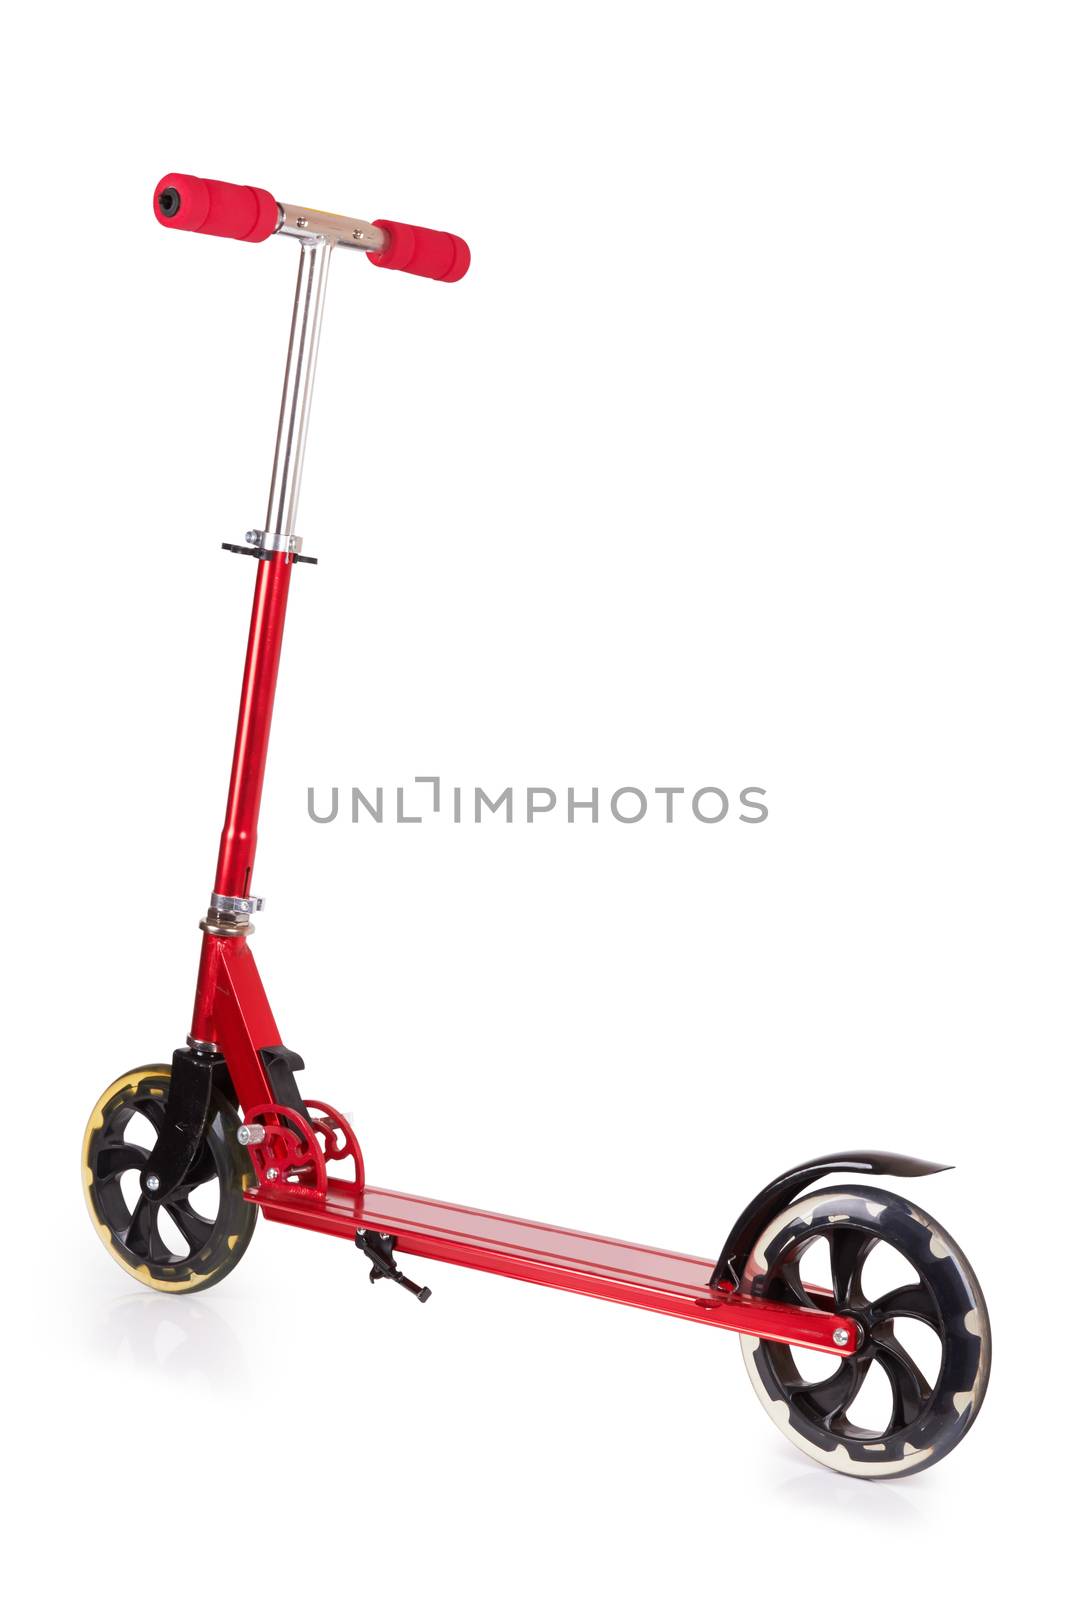 Red metal scooter by pioneer111